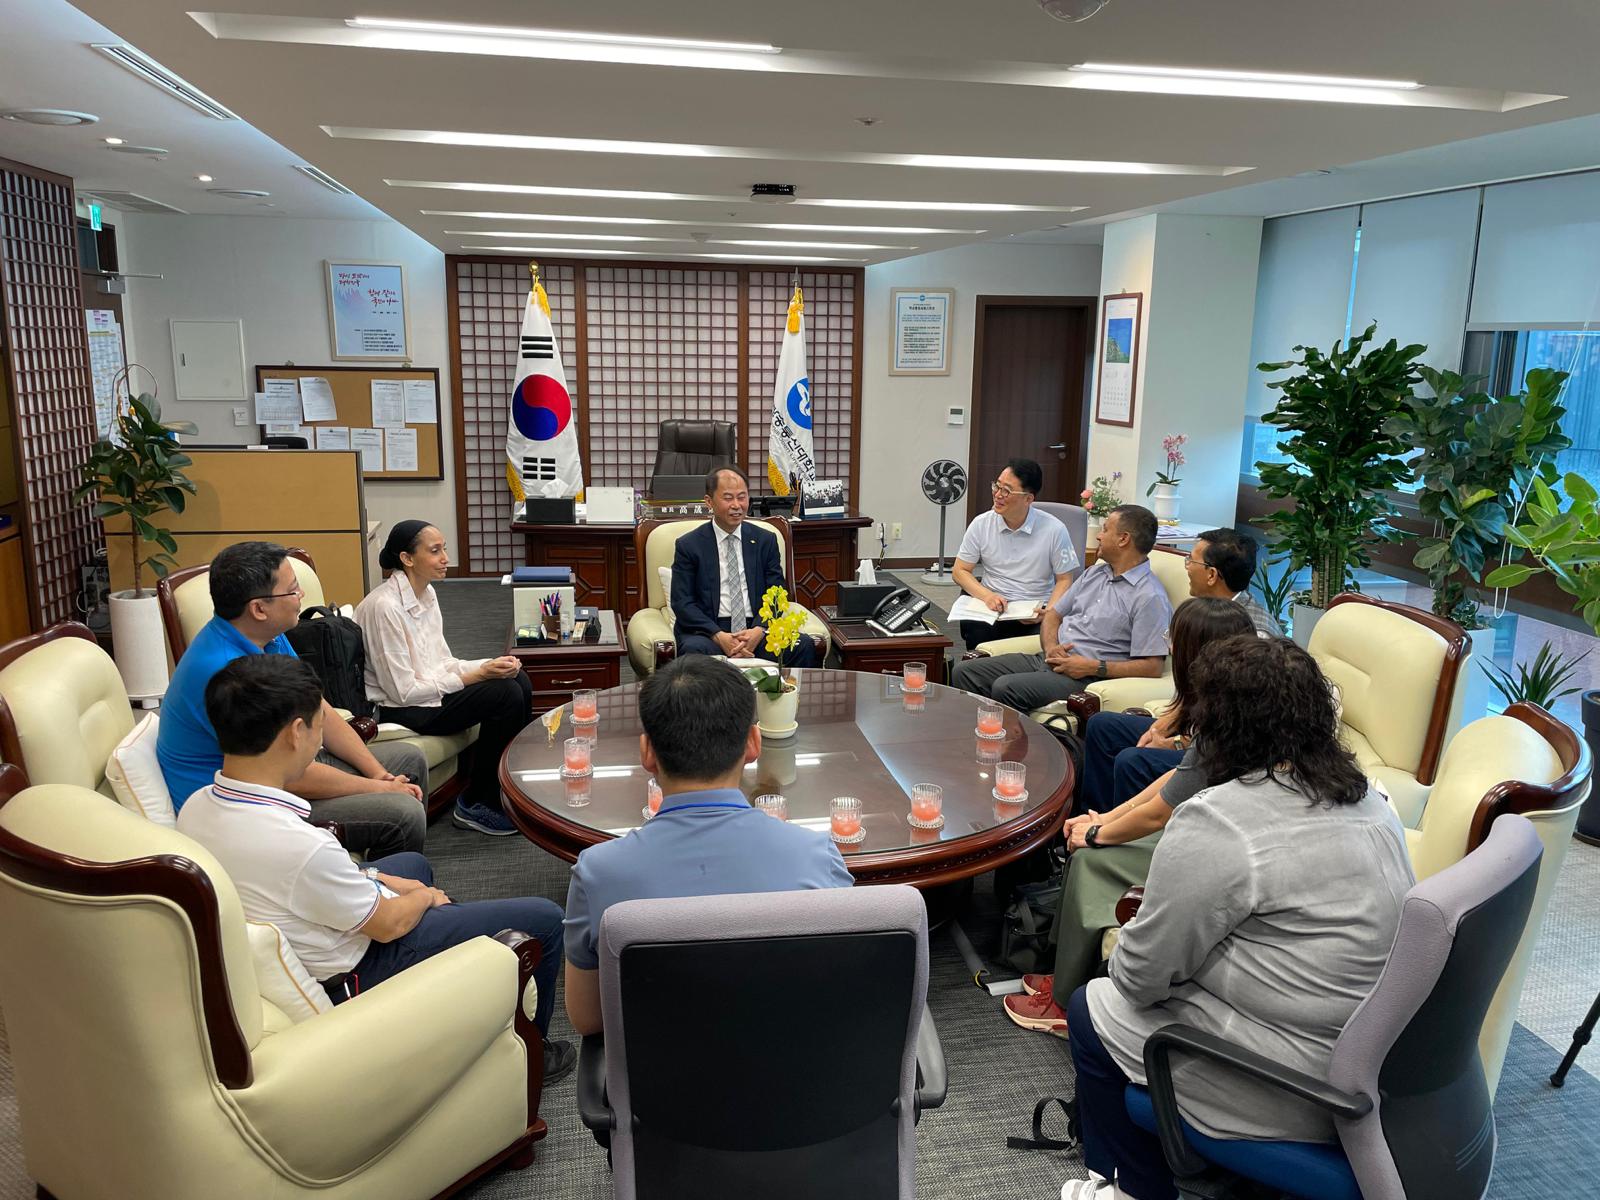 The delegates also had a working session with the President of Korea National Open University - Dr. Ko Song-hwan, at the office, expressing appreciation for the warm reception and thoughtful organization by KNOU.